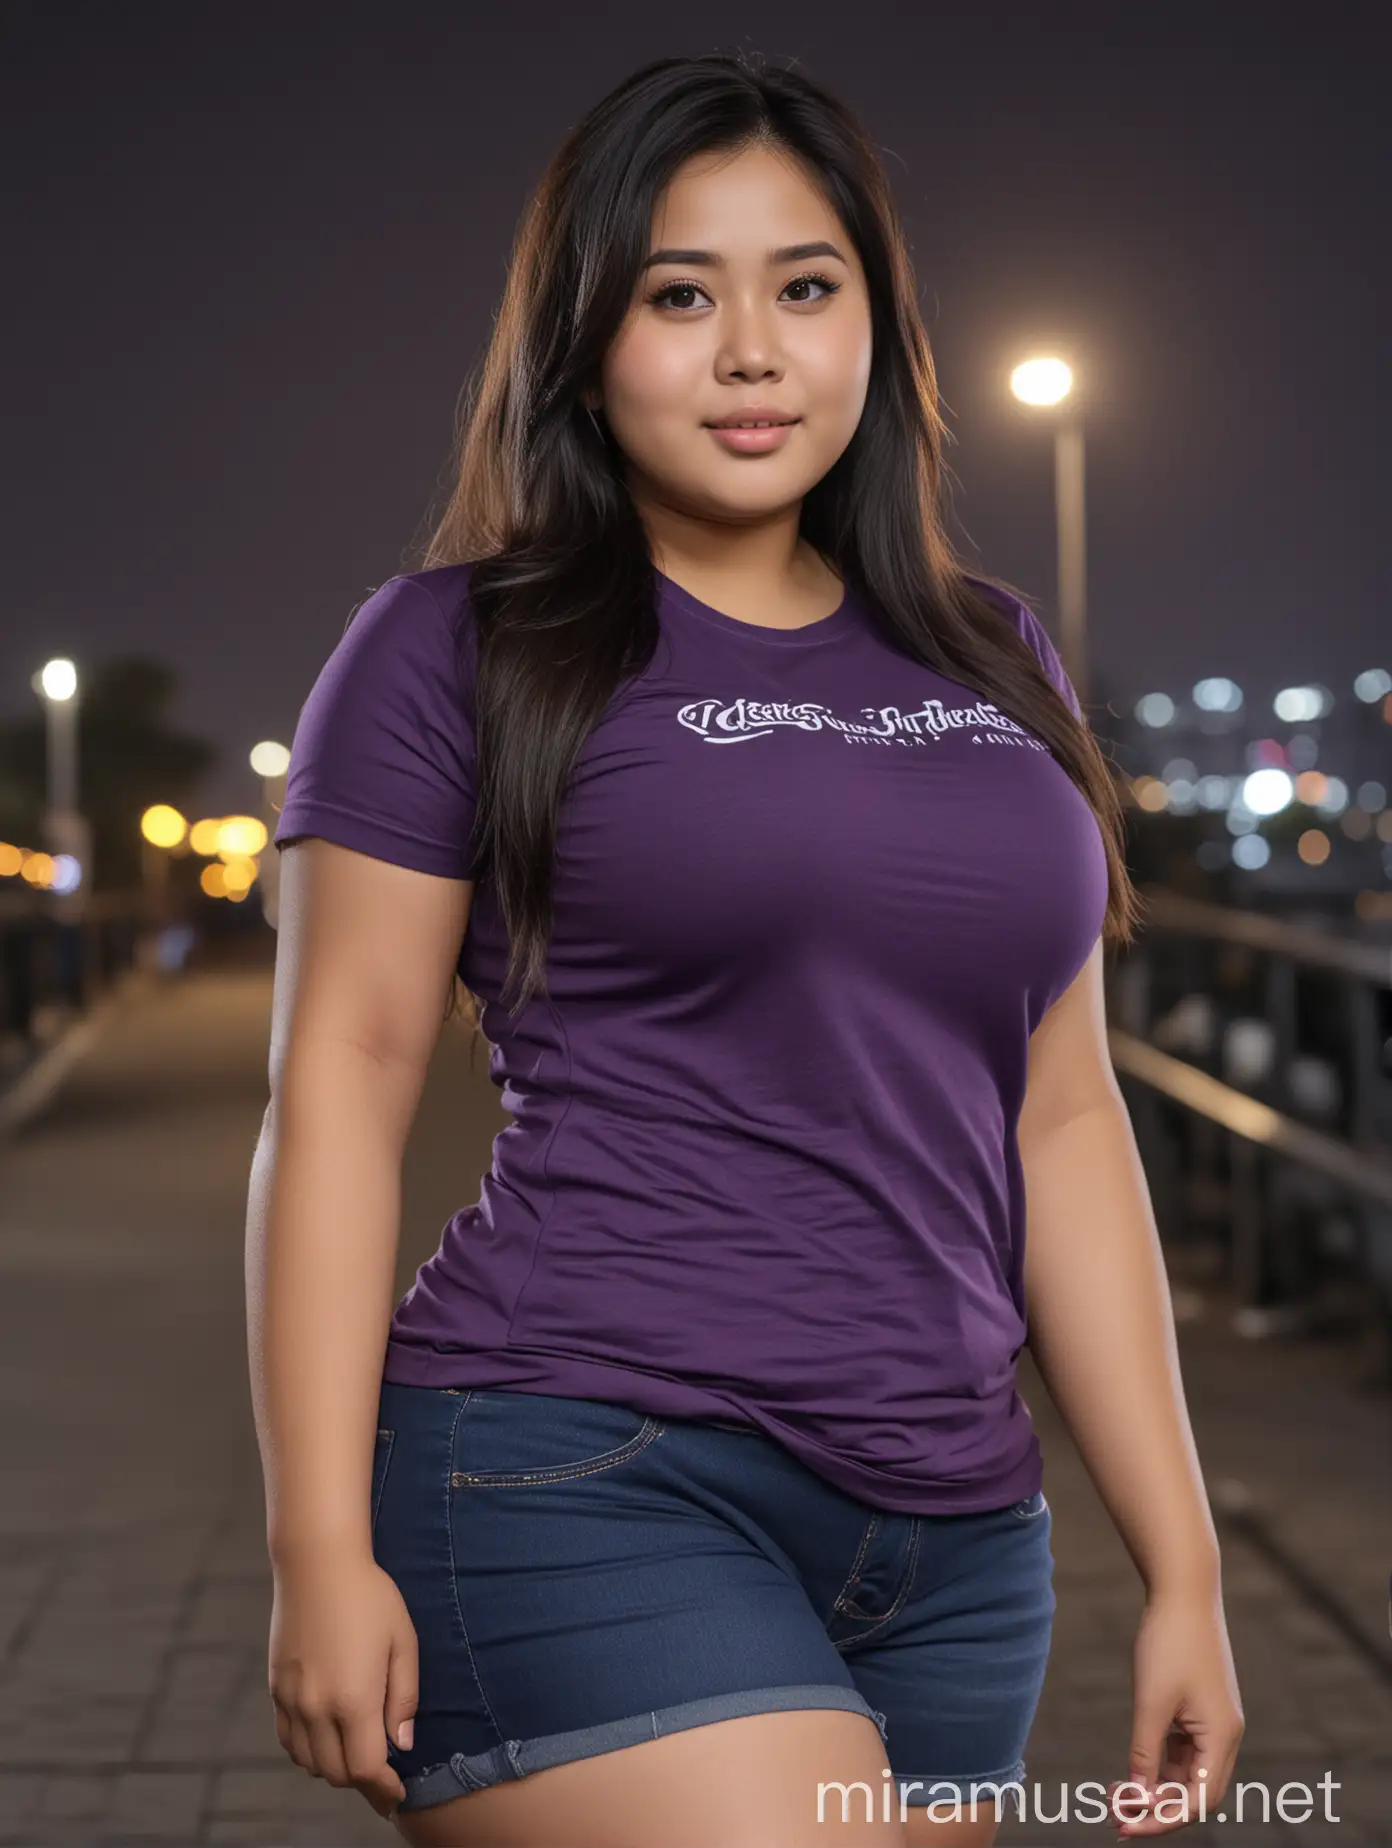 Beautiful Indonesian Woman with Soft Smile in Purple Outfit at Night